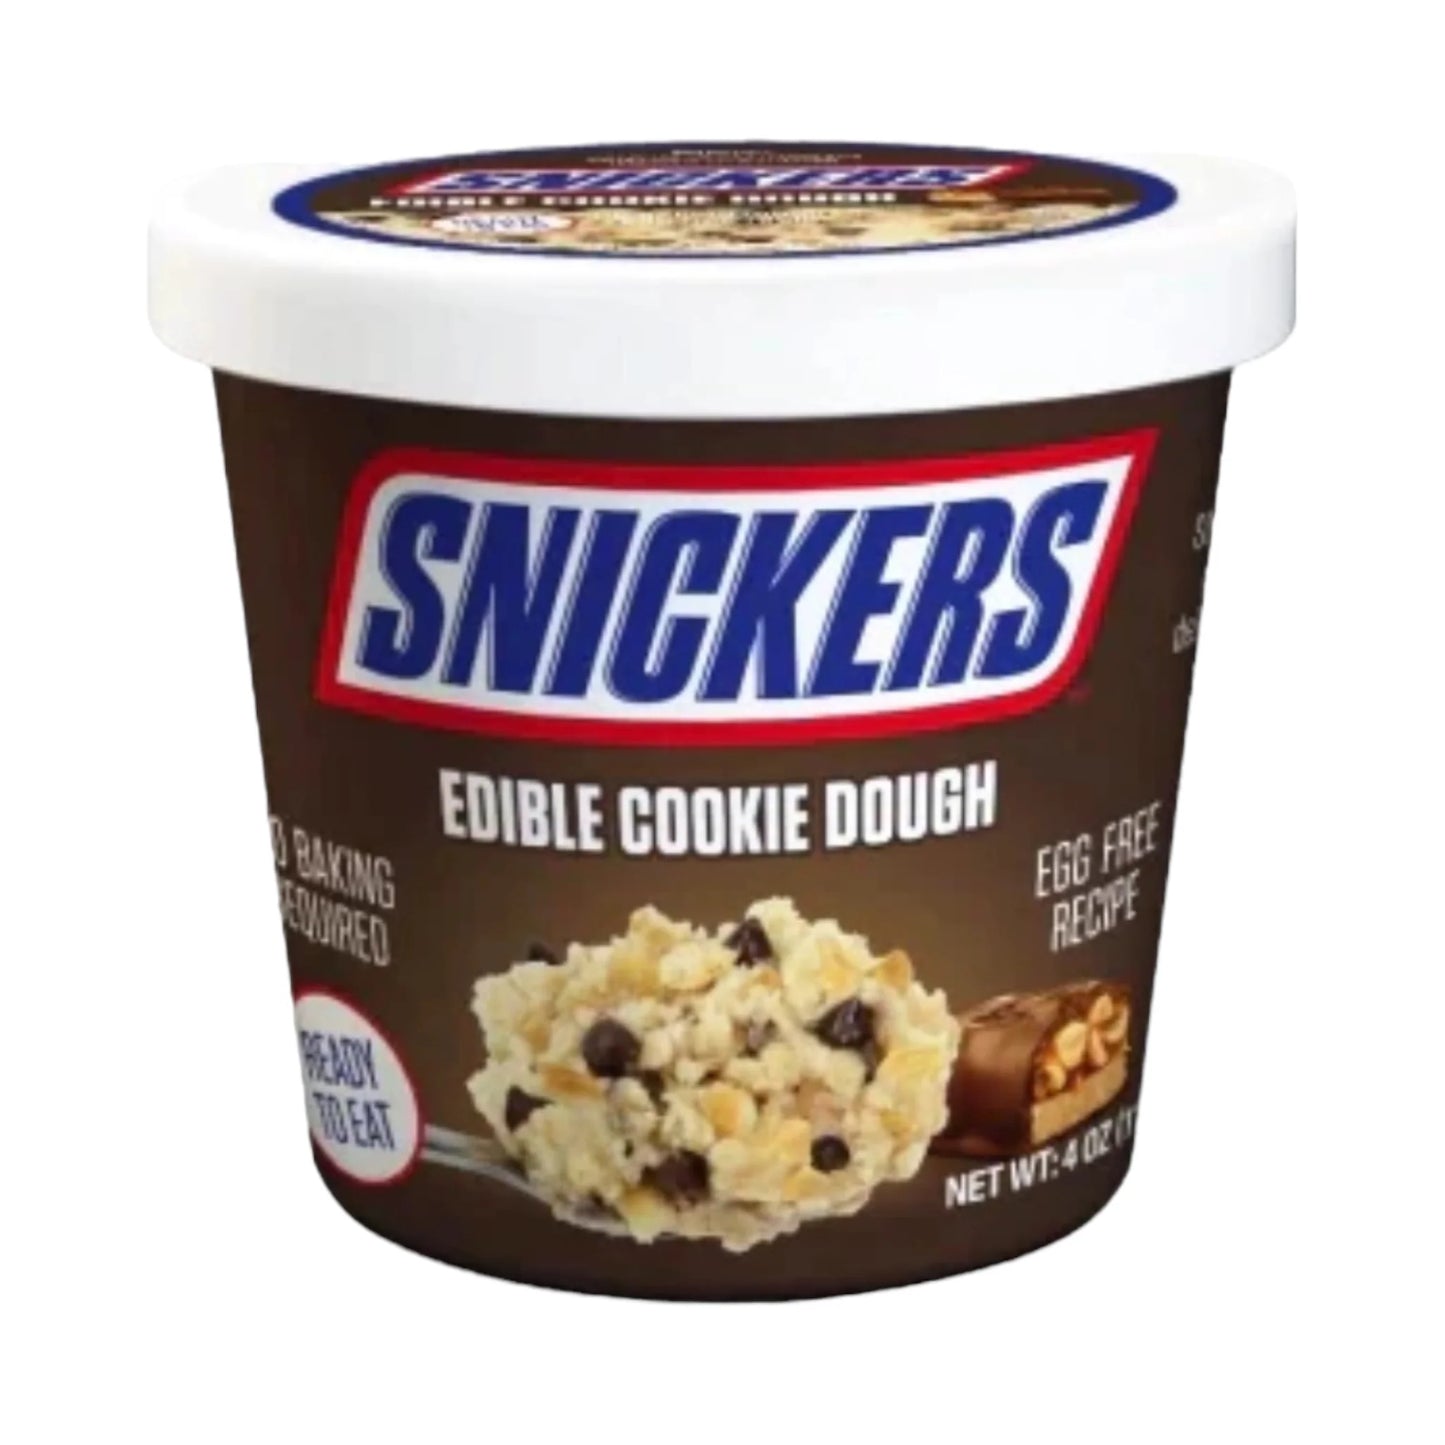 Snickers Edible Cookie Dough 113g